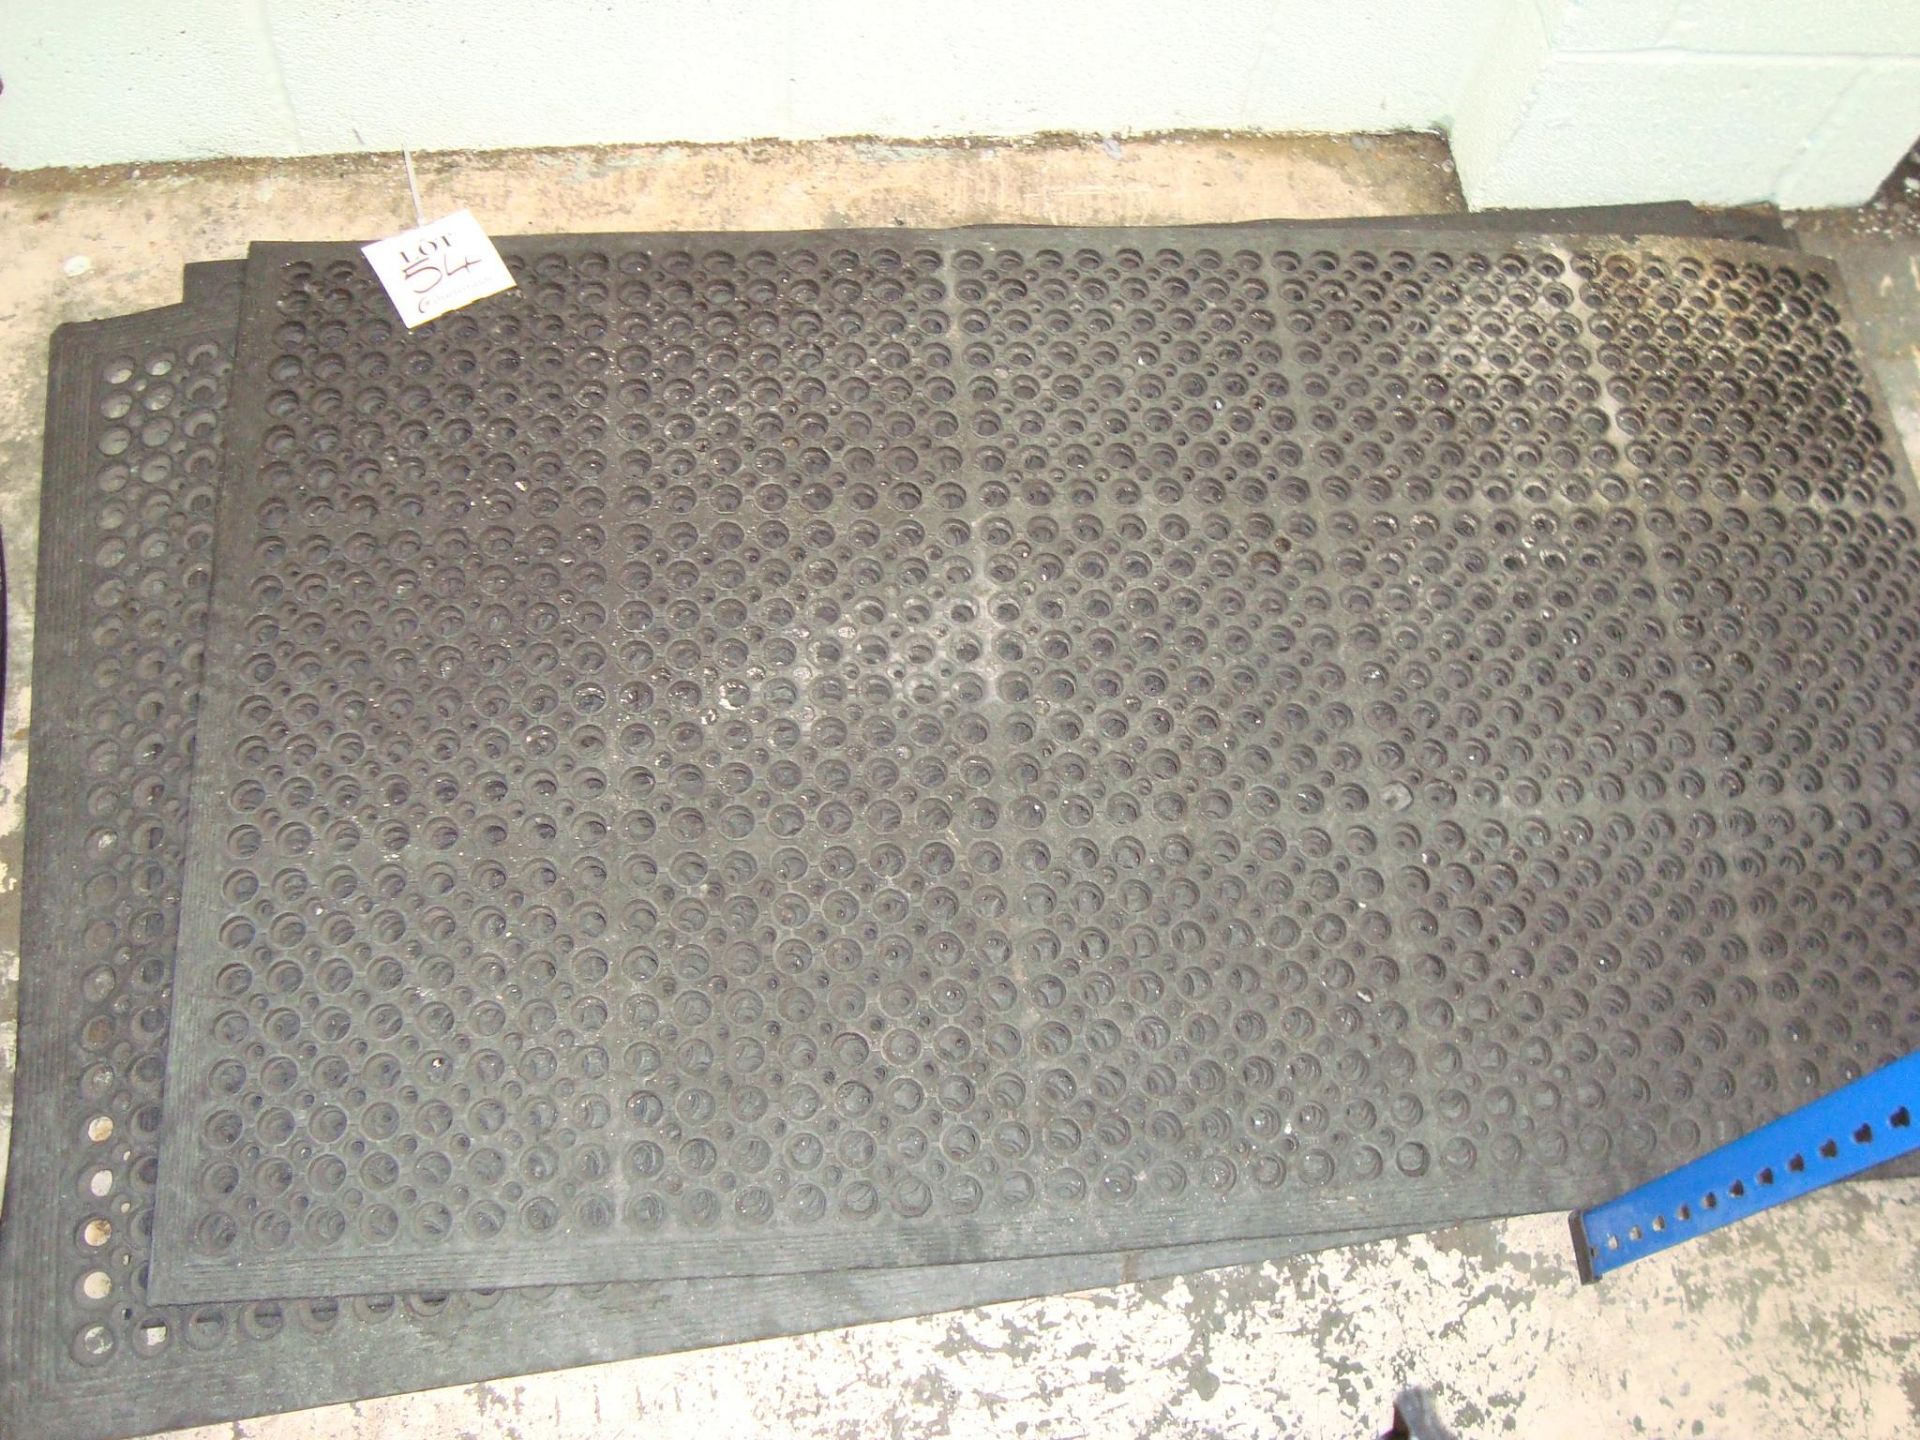 A quantity of non-slip perforated floor mats approx 1,500x800mm, as lotted